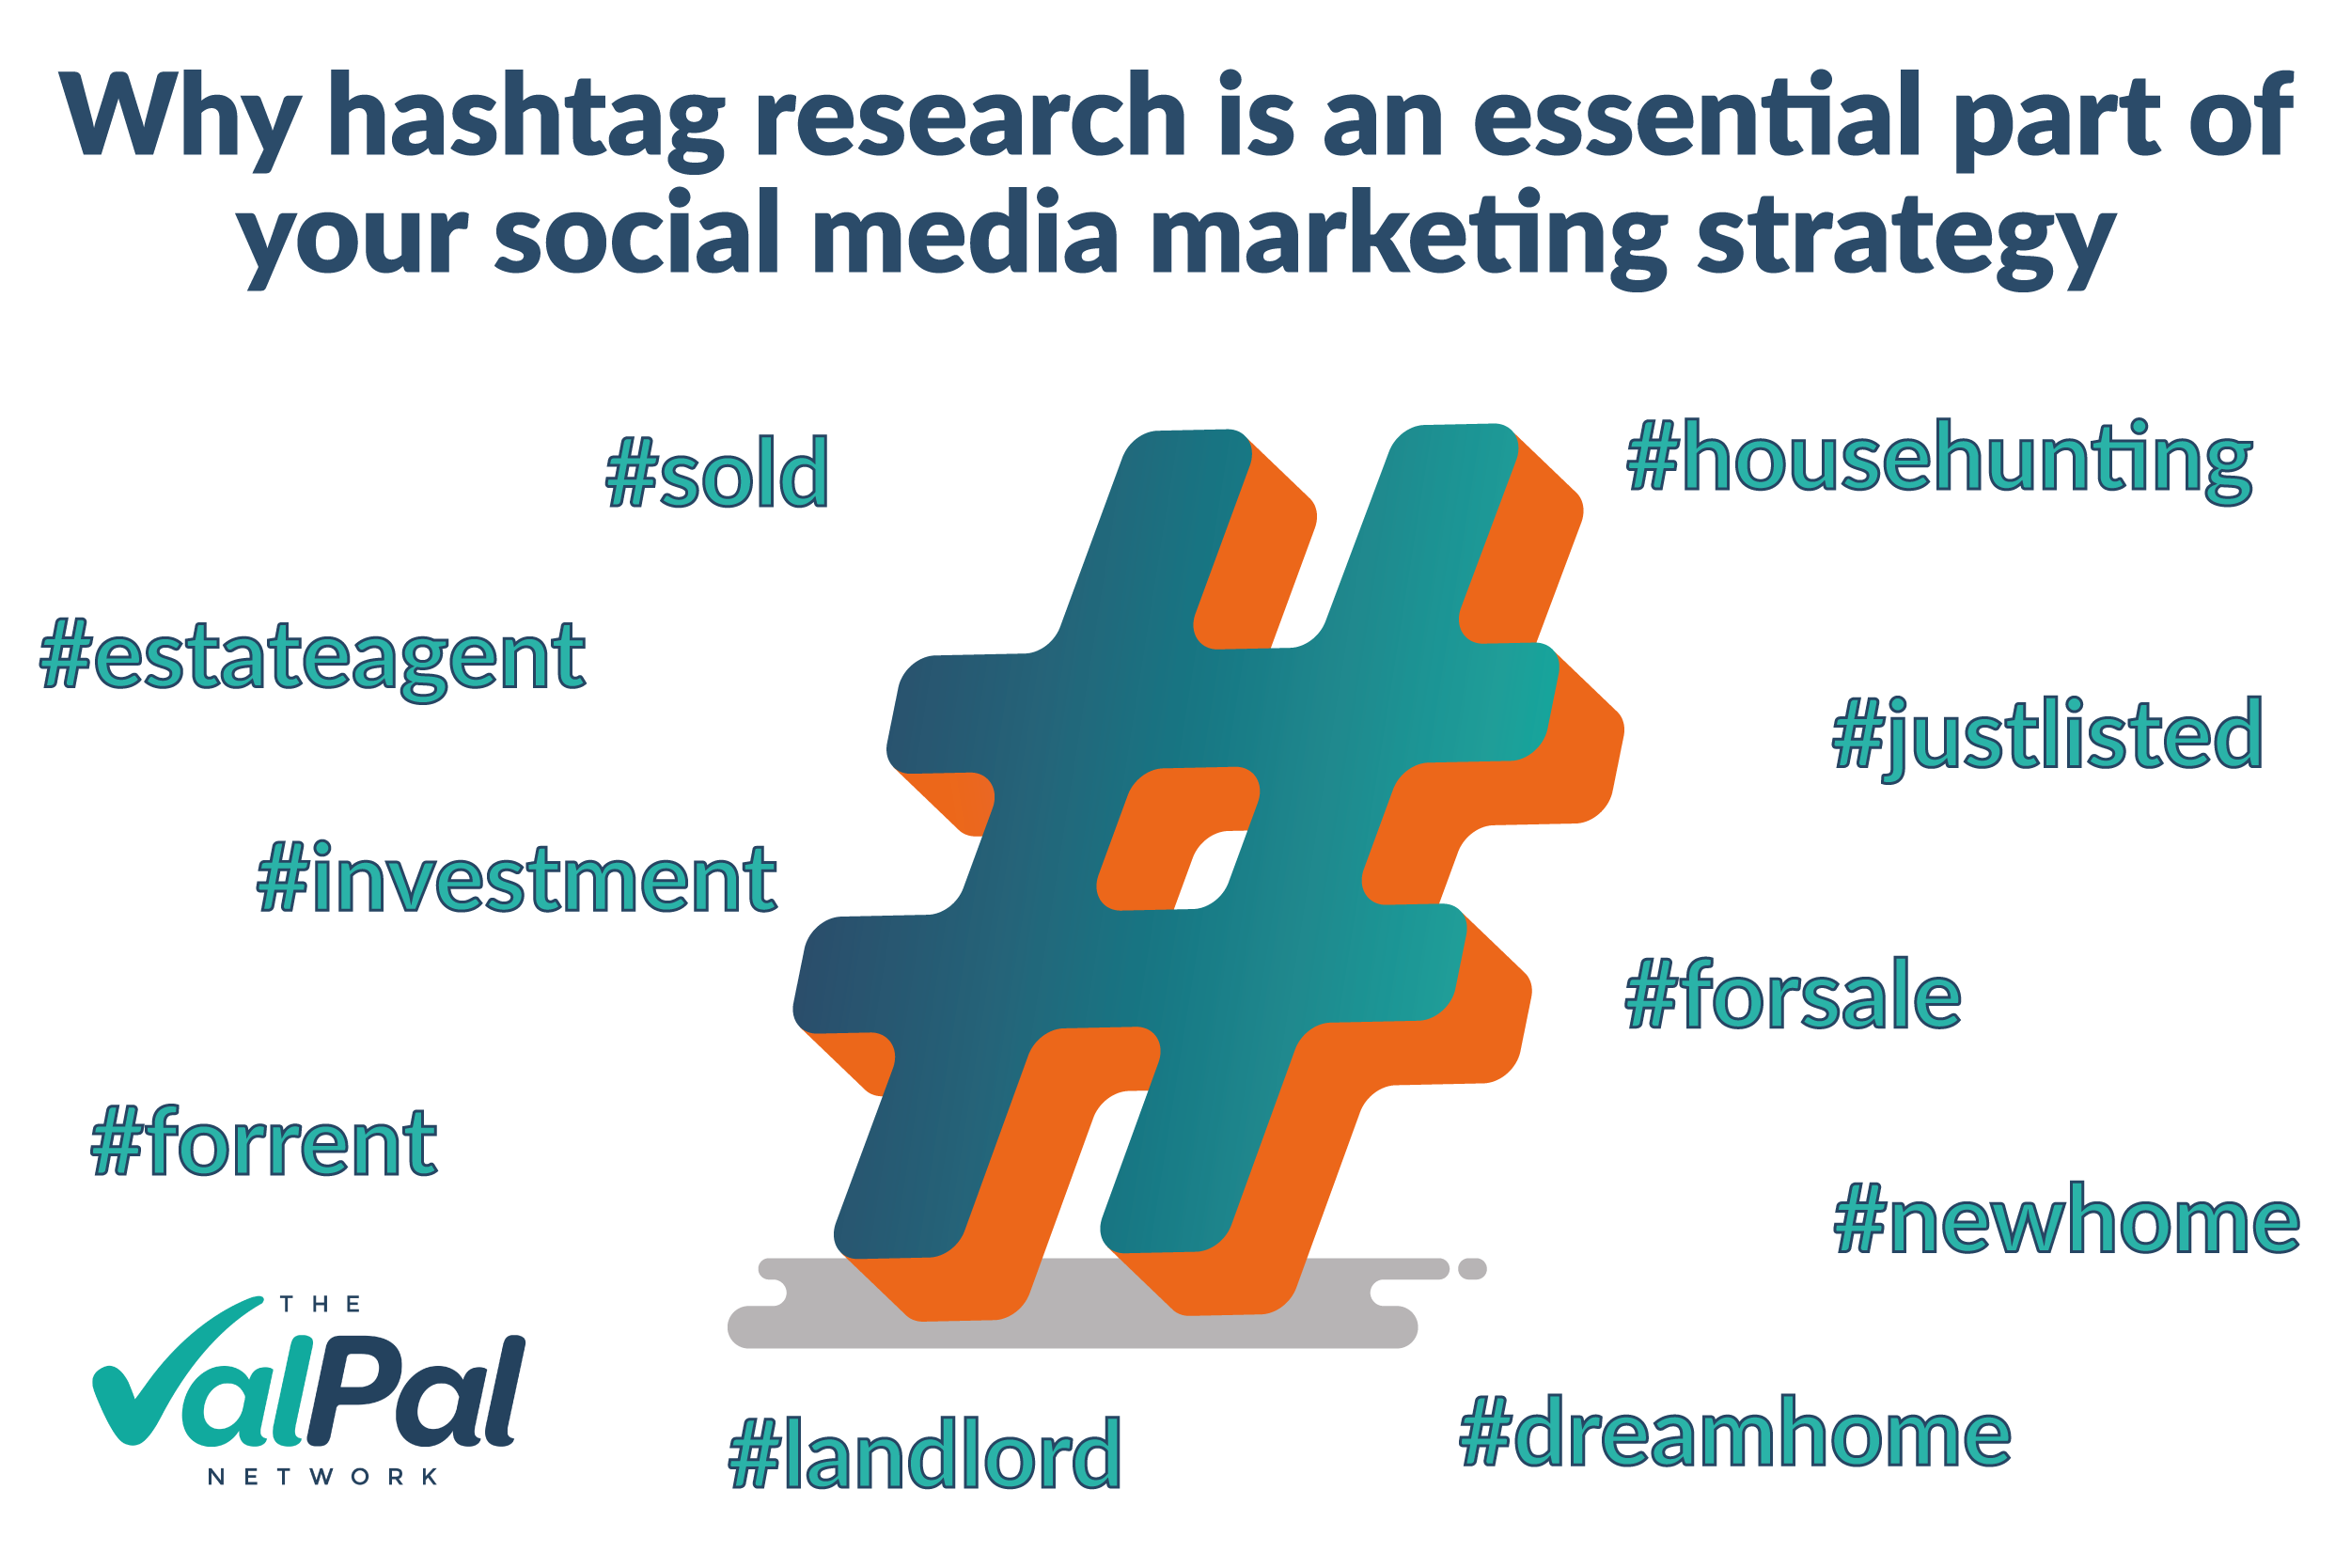 Why hashtag research should be an essential part of your social media marketing strategy